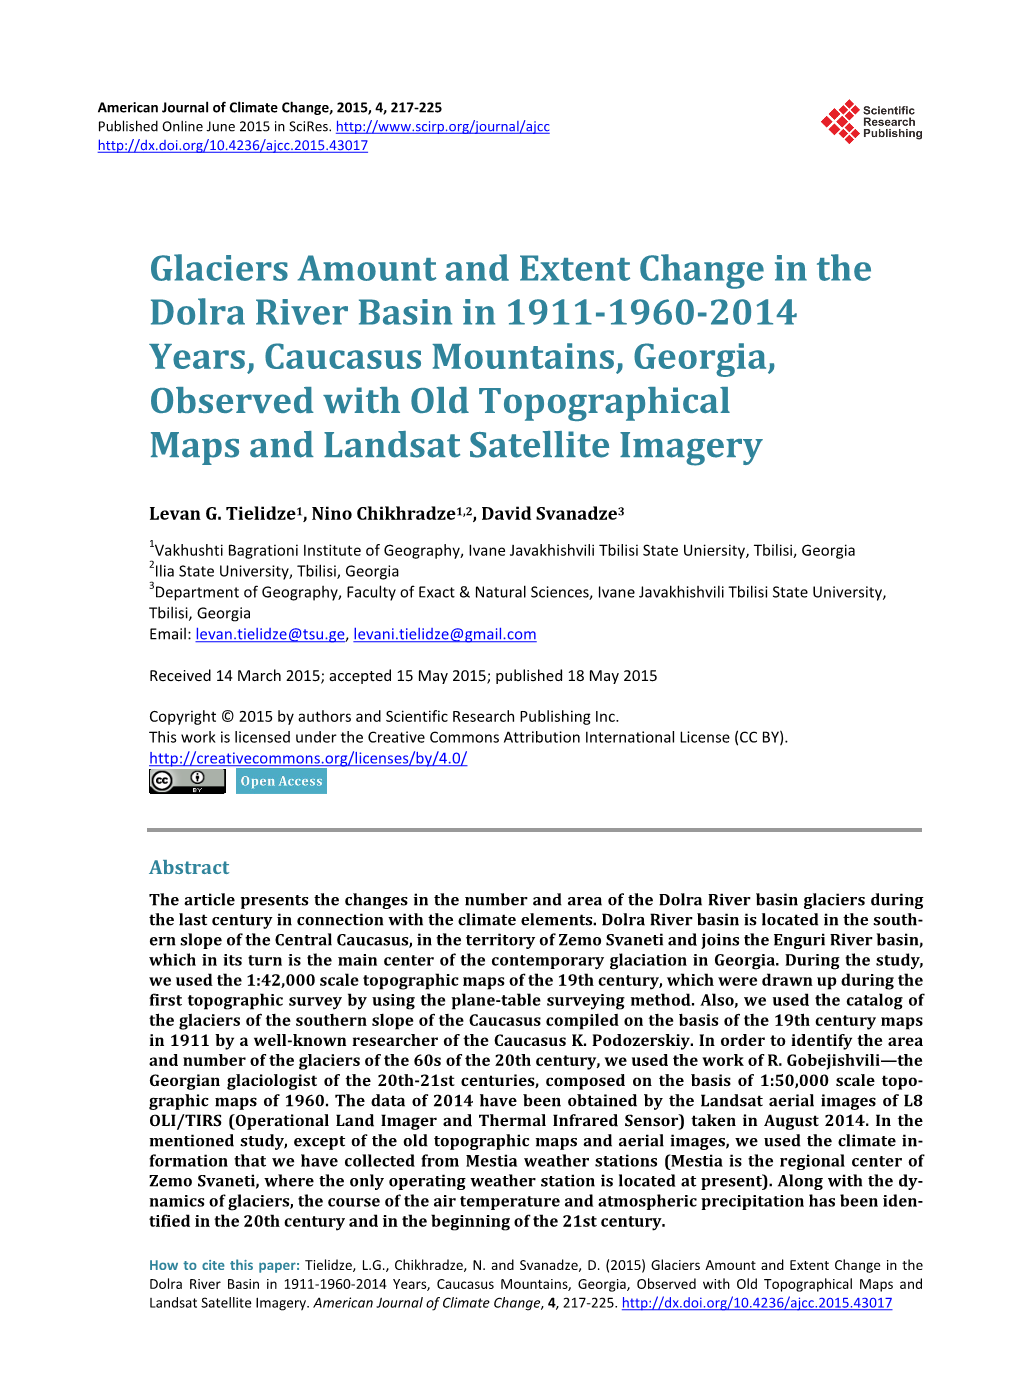 Glaciers Amount and Extent Change in the Dolra River Basin in 1911